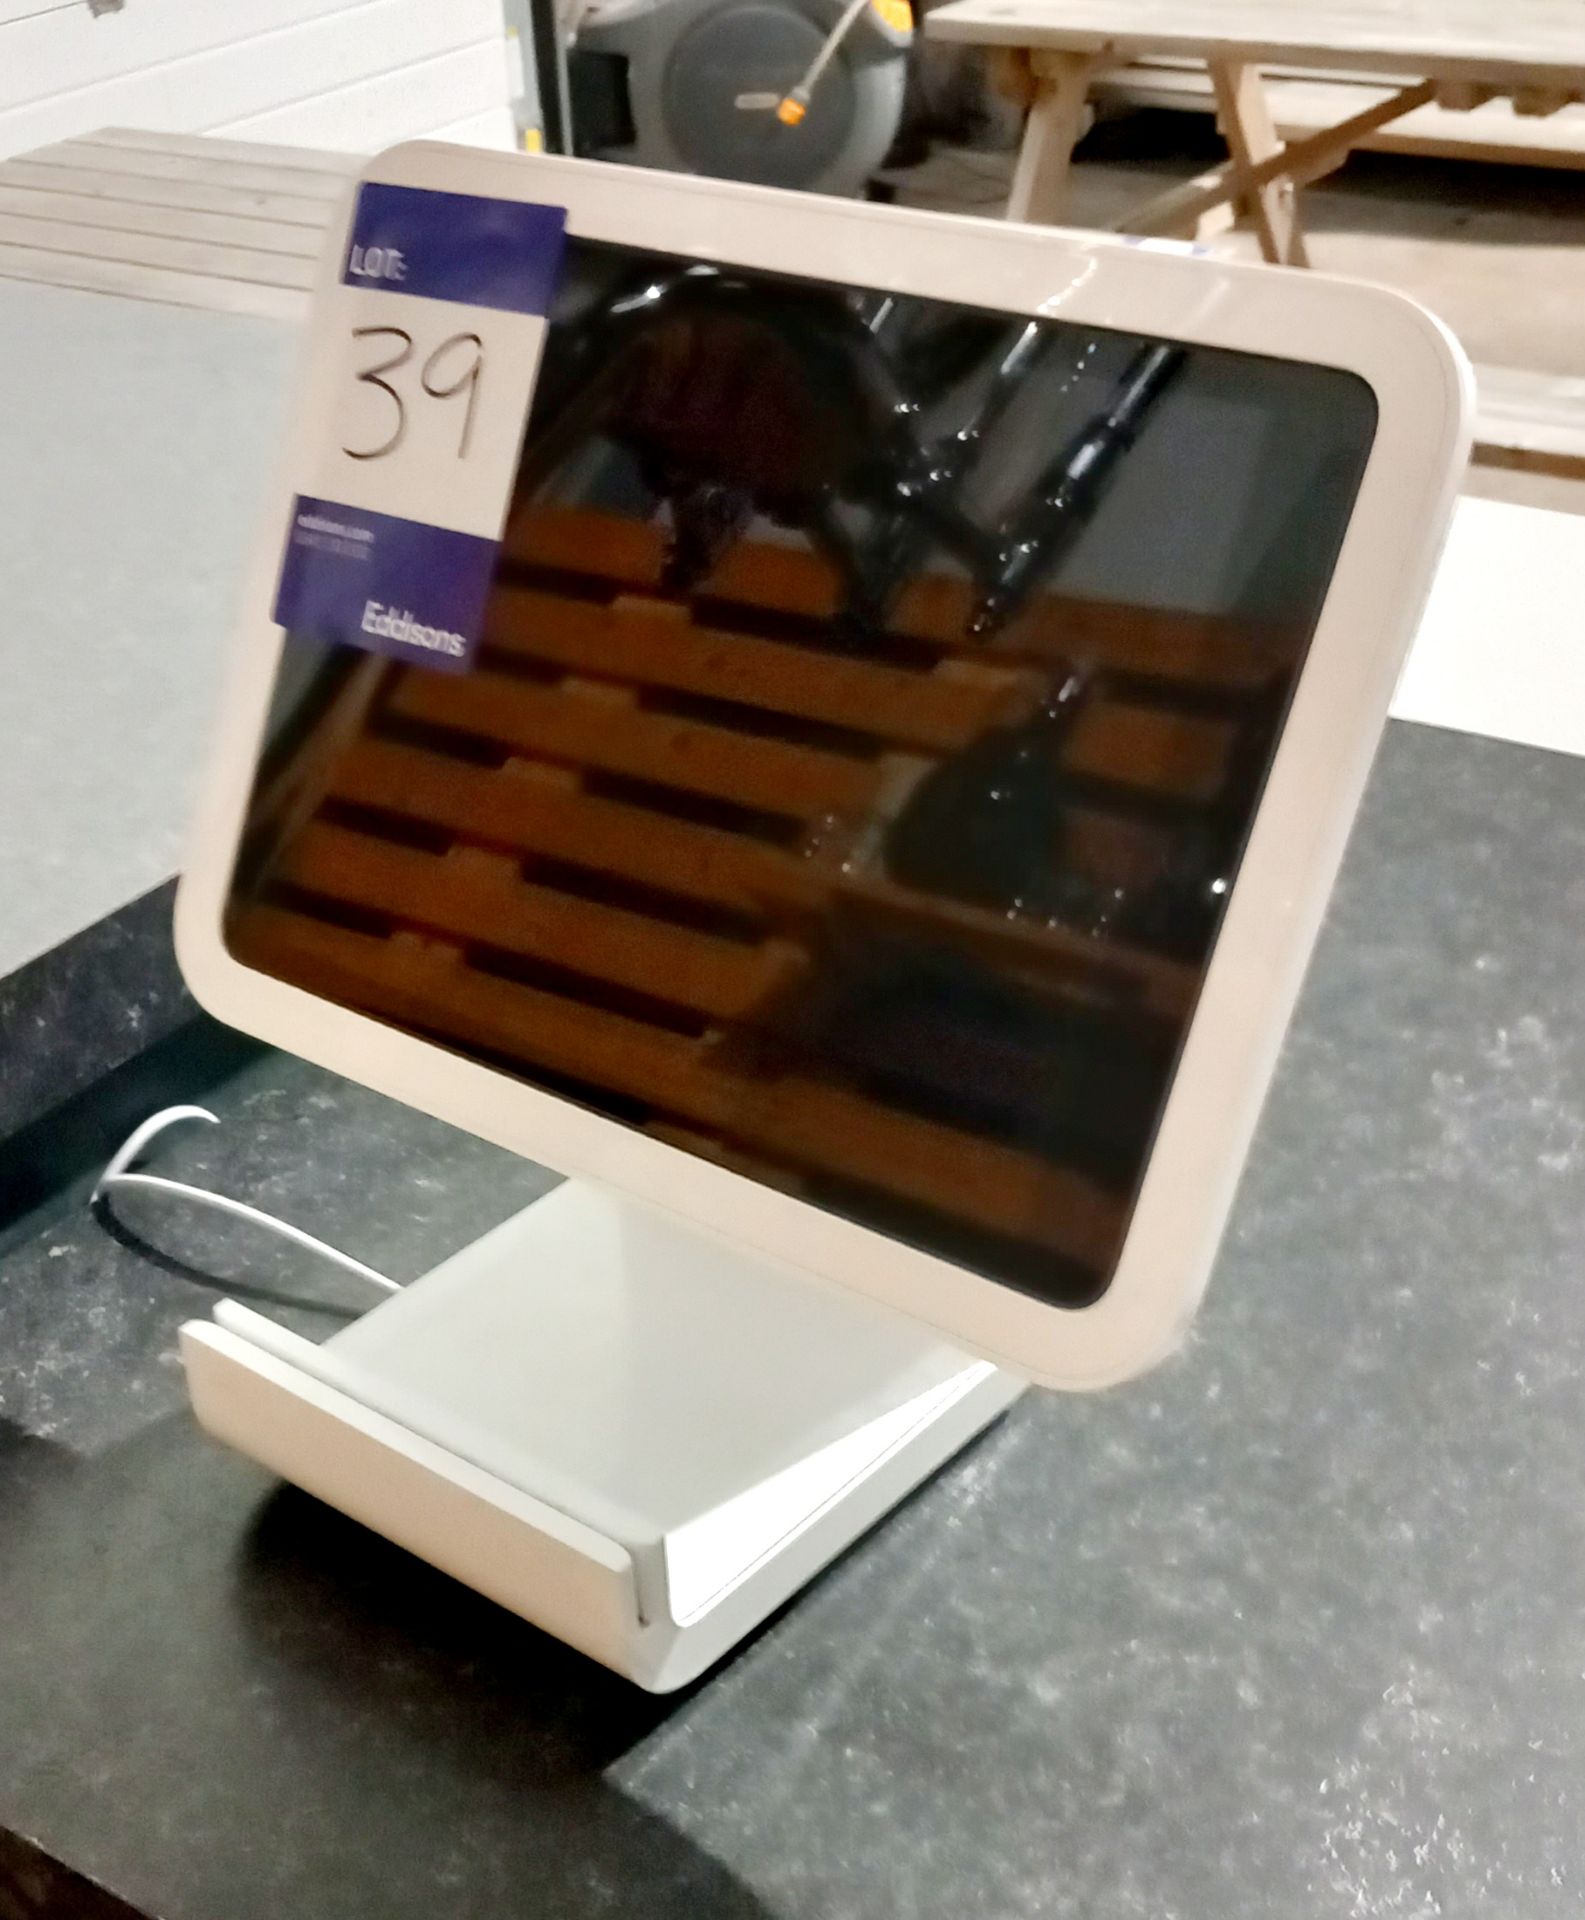 Star receipt printer with till and ipad till system - Image 3 of 3